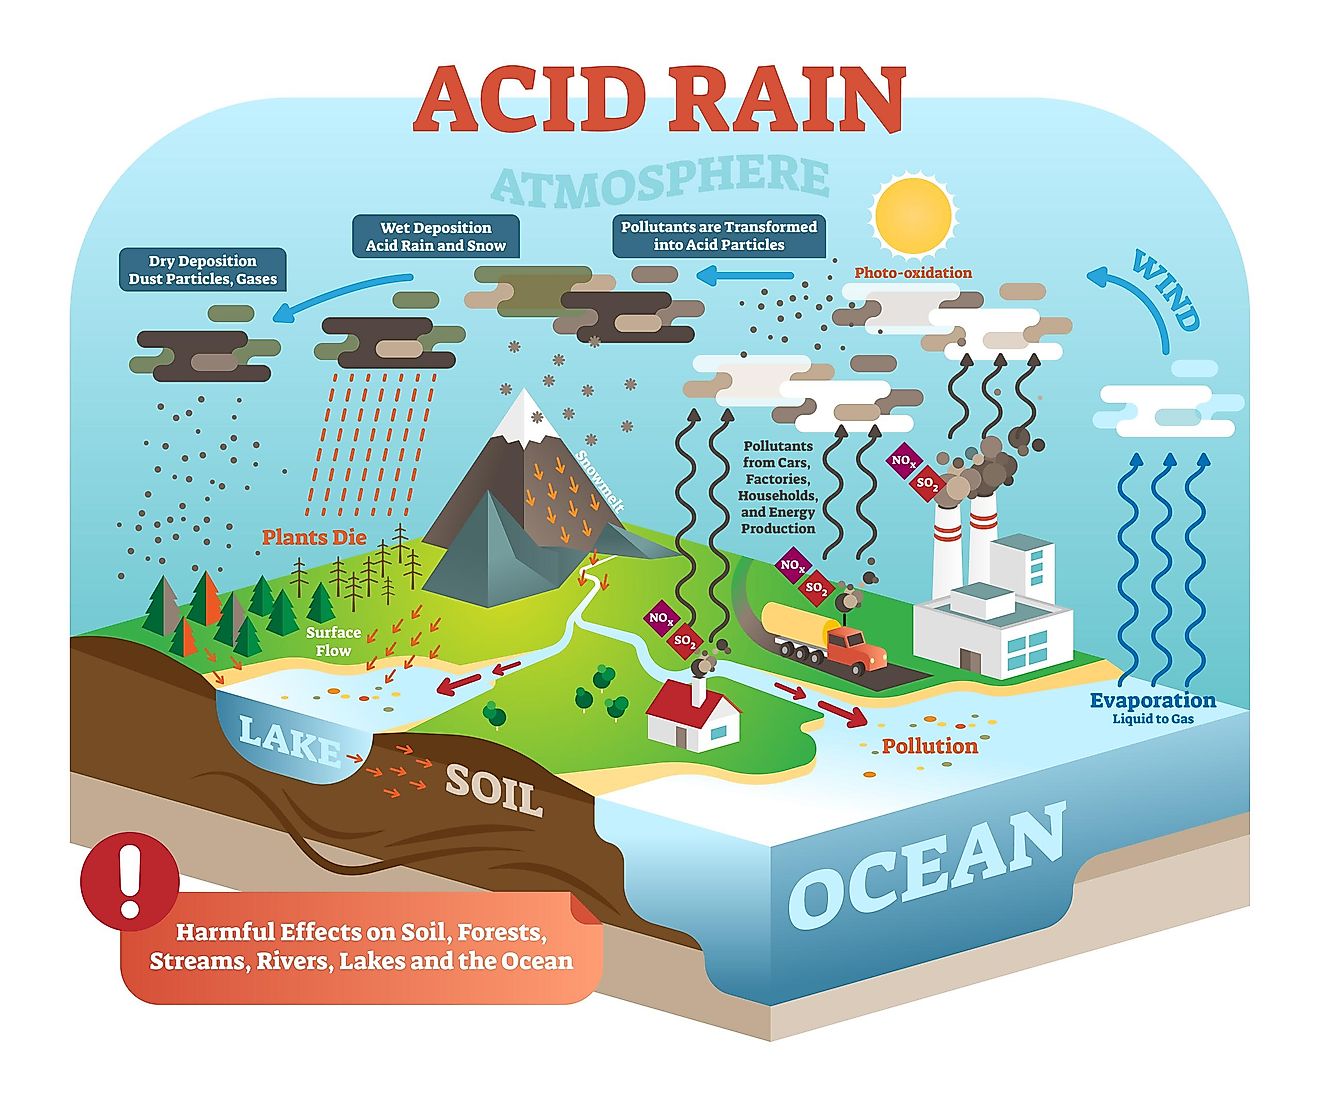 Acid rain cycle in nature ecosystem.